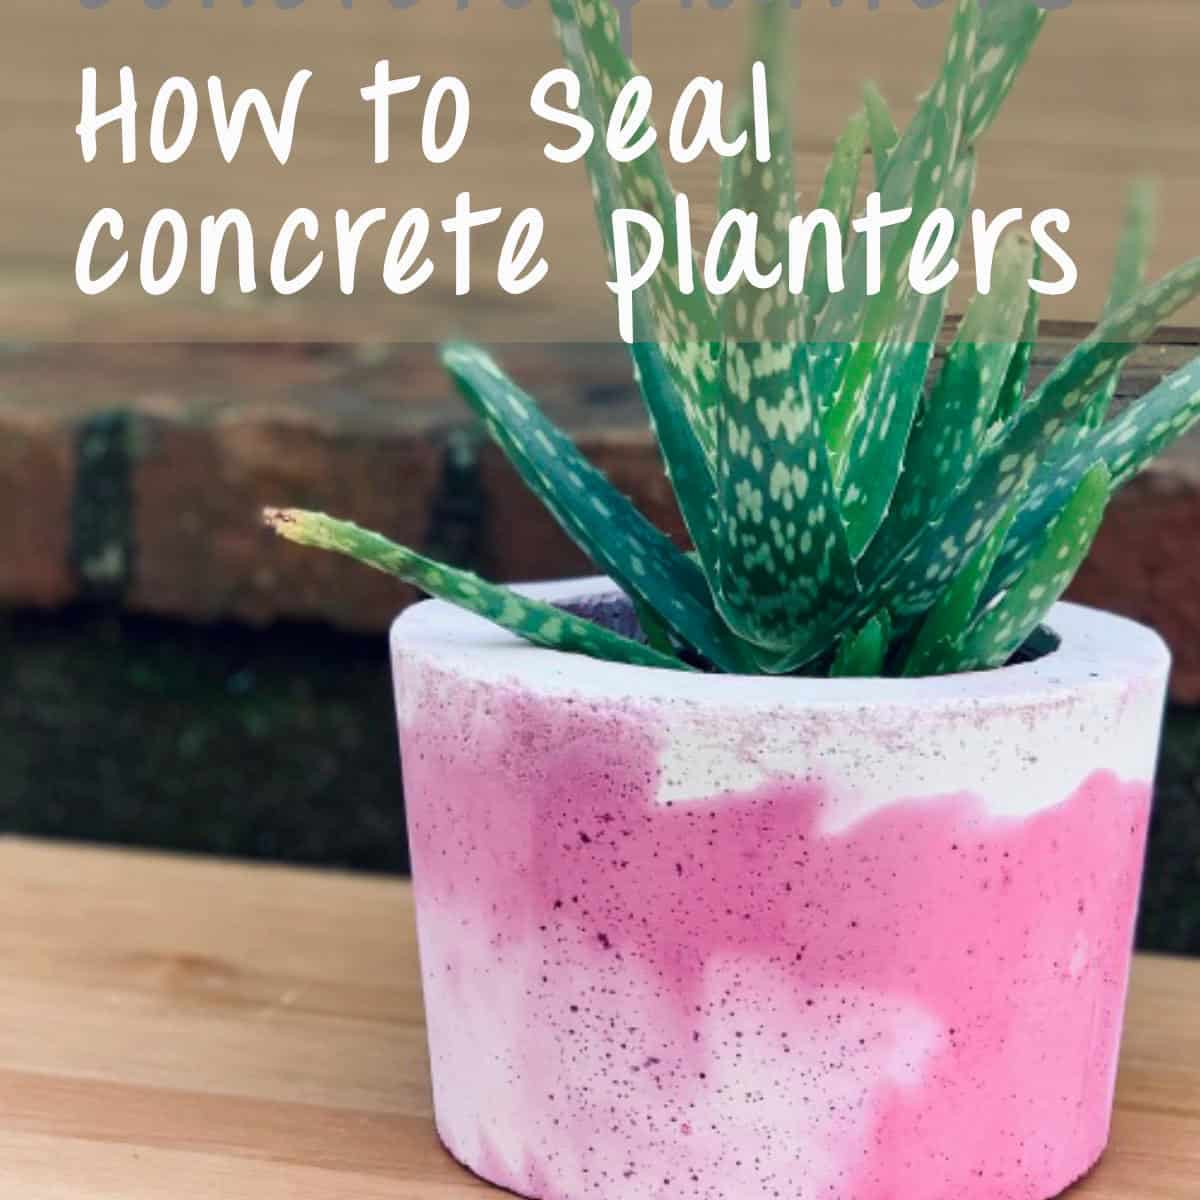 How To Seal A Concrete Planter & When You Shouldn’t